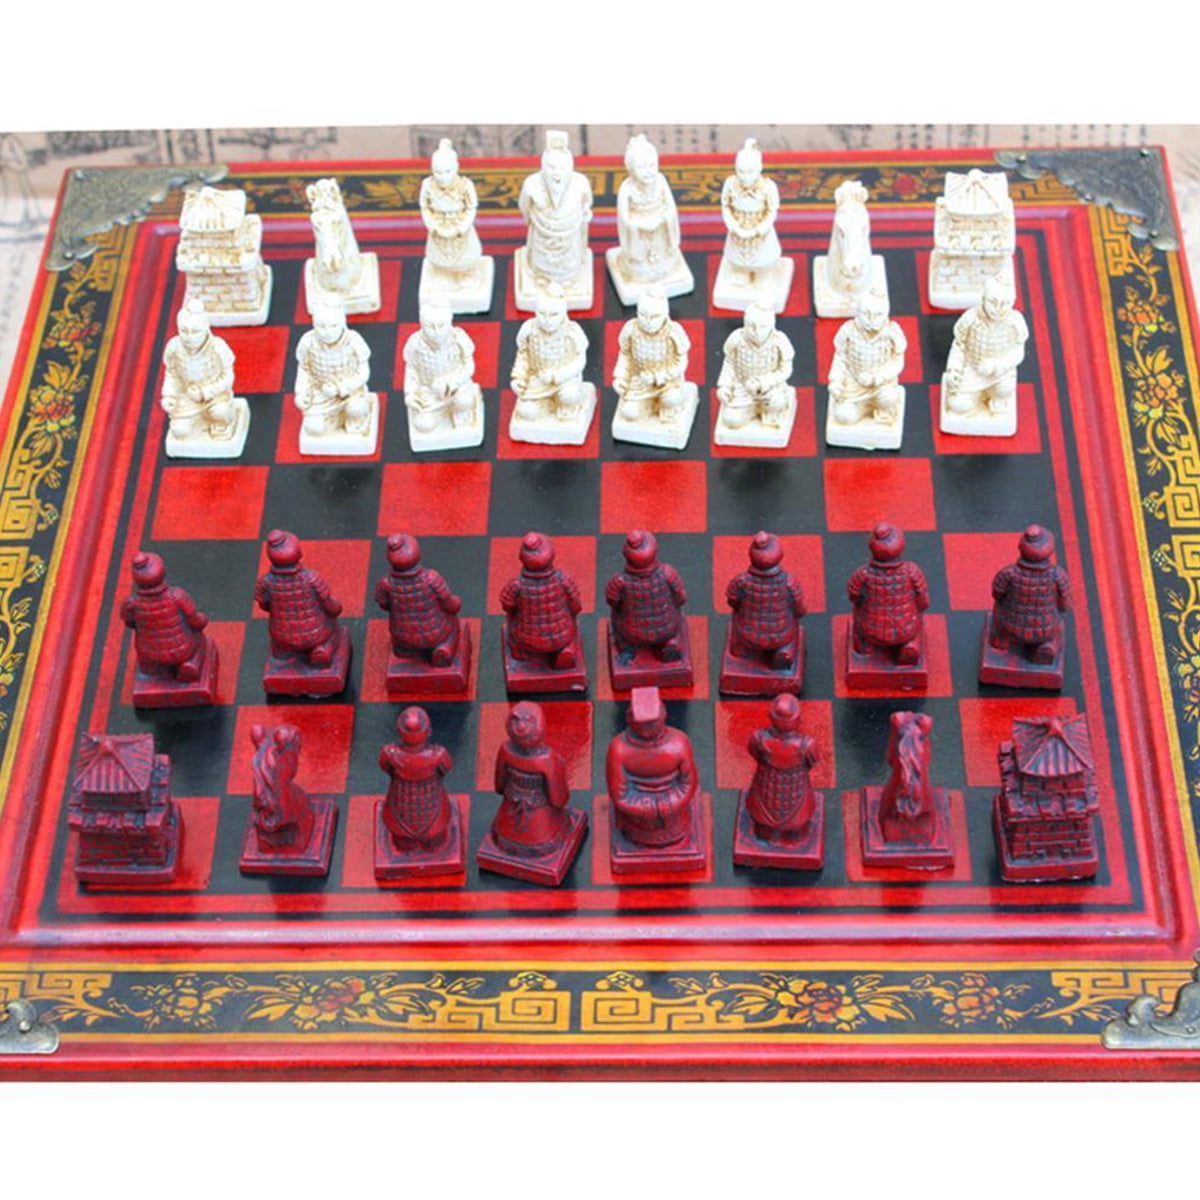 Antique Terra-Cotta Warriors Chess Set Wooden Chess Board Chess Gifts Sets 26cm 